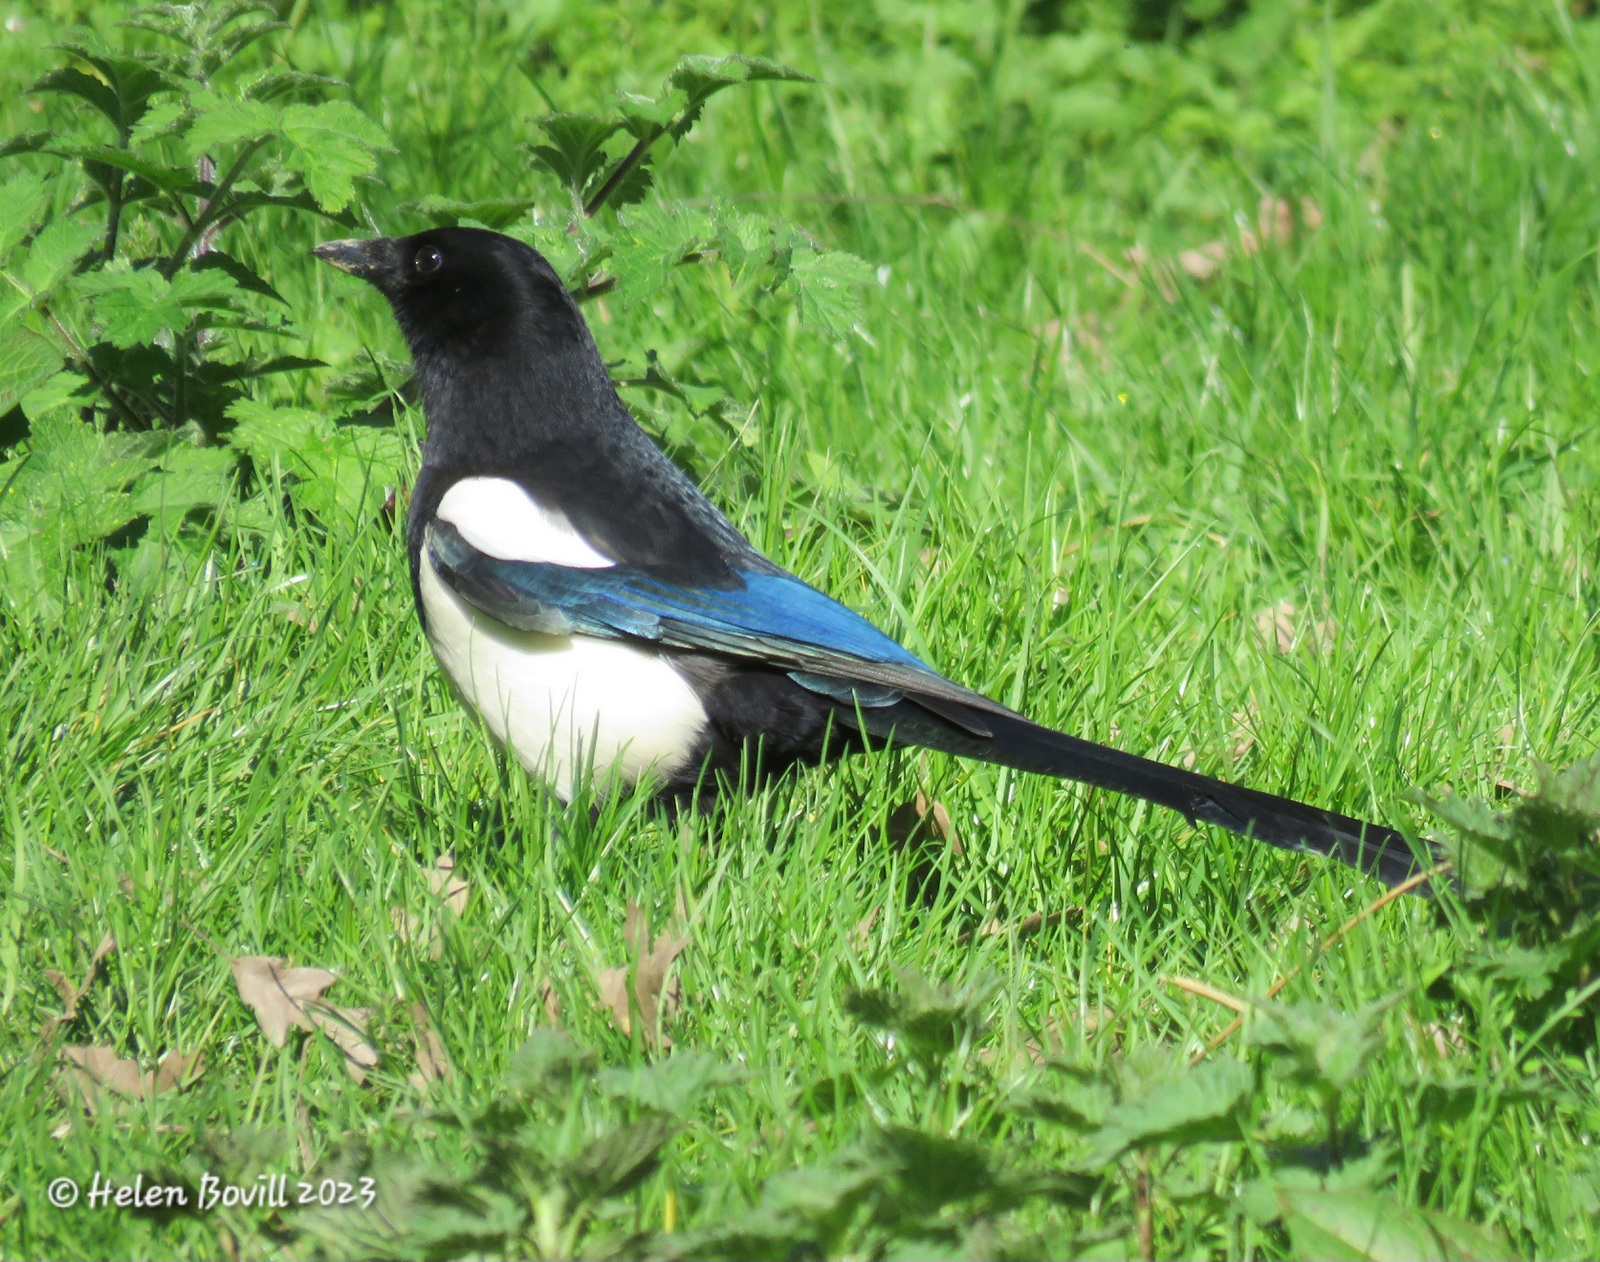 Cemetery wildlife - a Magpie on the grassy area in the middle of the cemetery